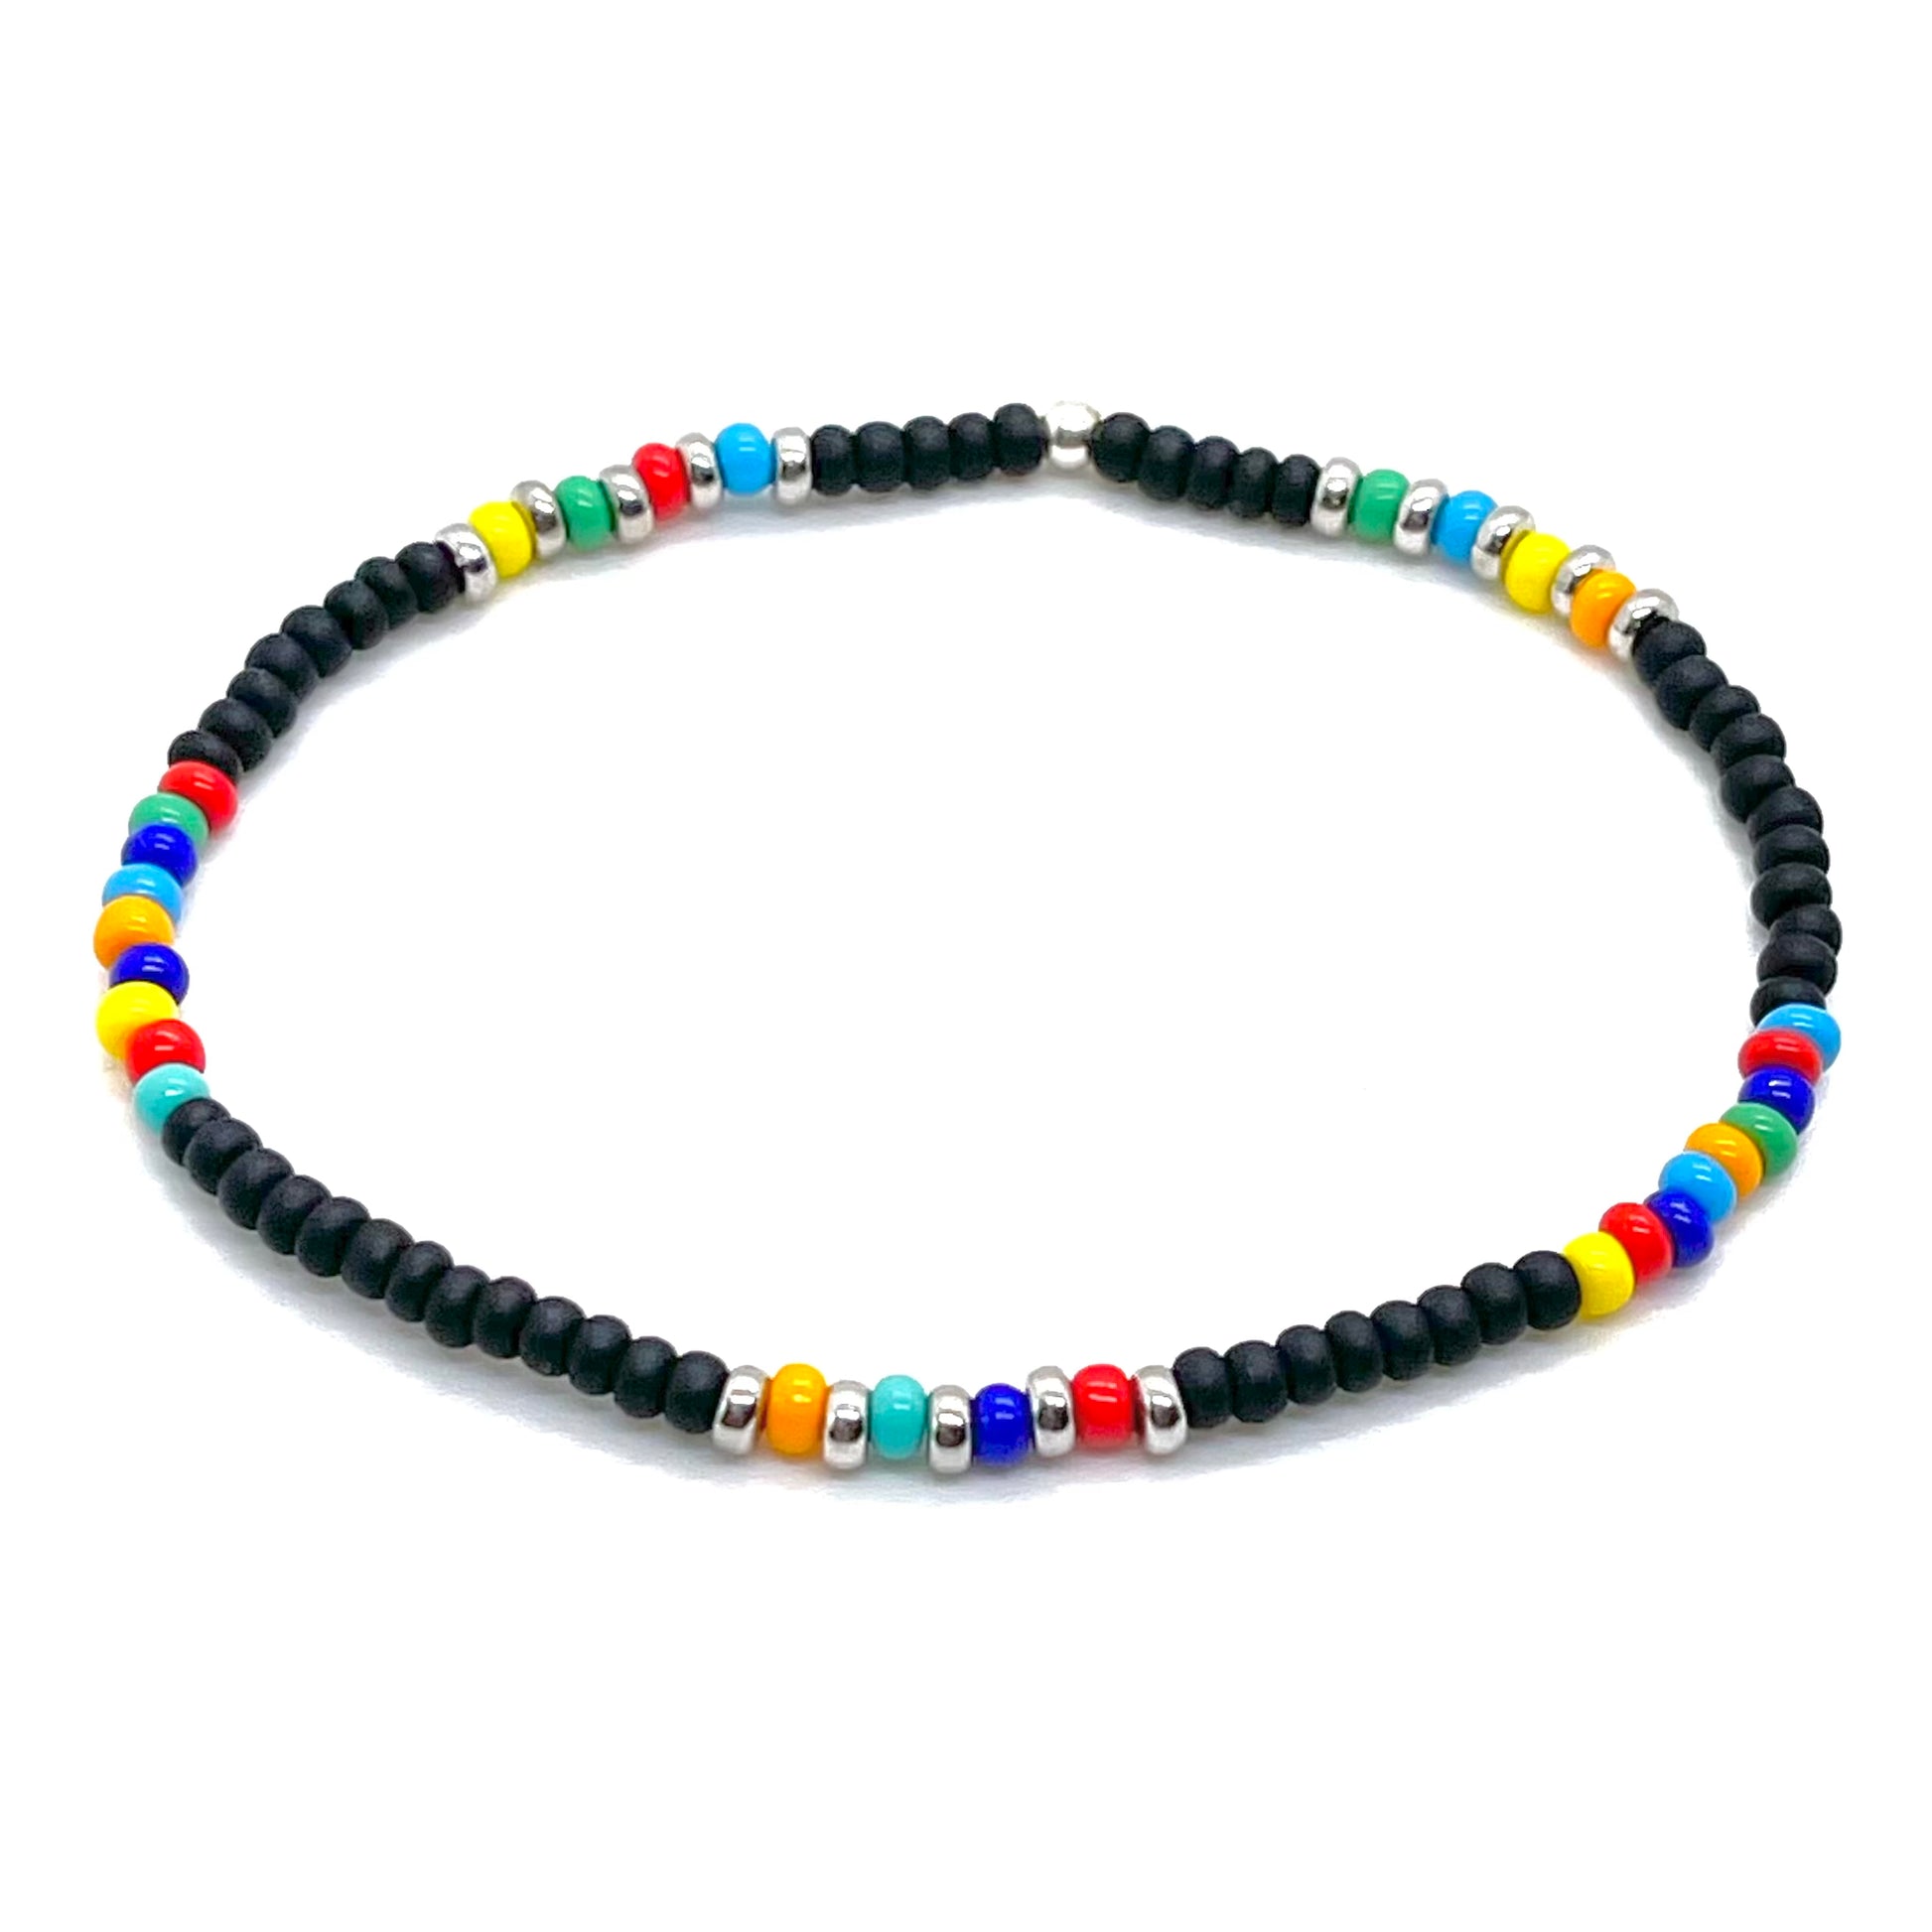 Men's black bead bracelet with rainbow accent beads on elastic stretch. Waterproof and hanmade in NYC.